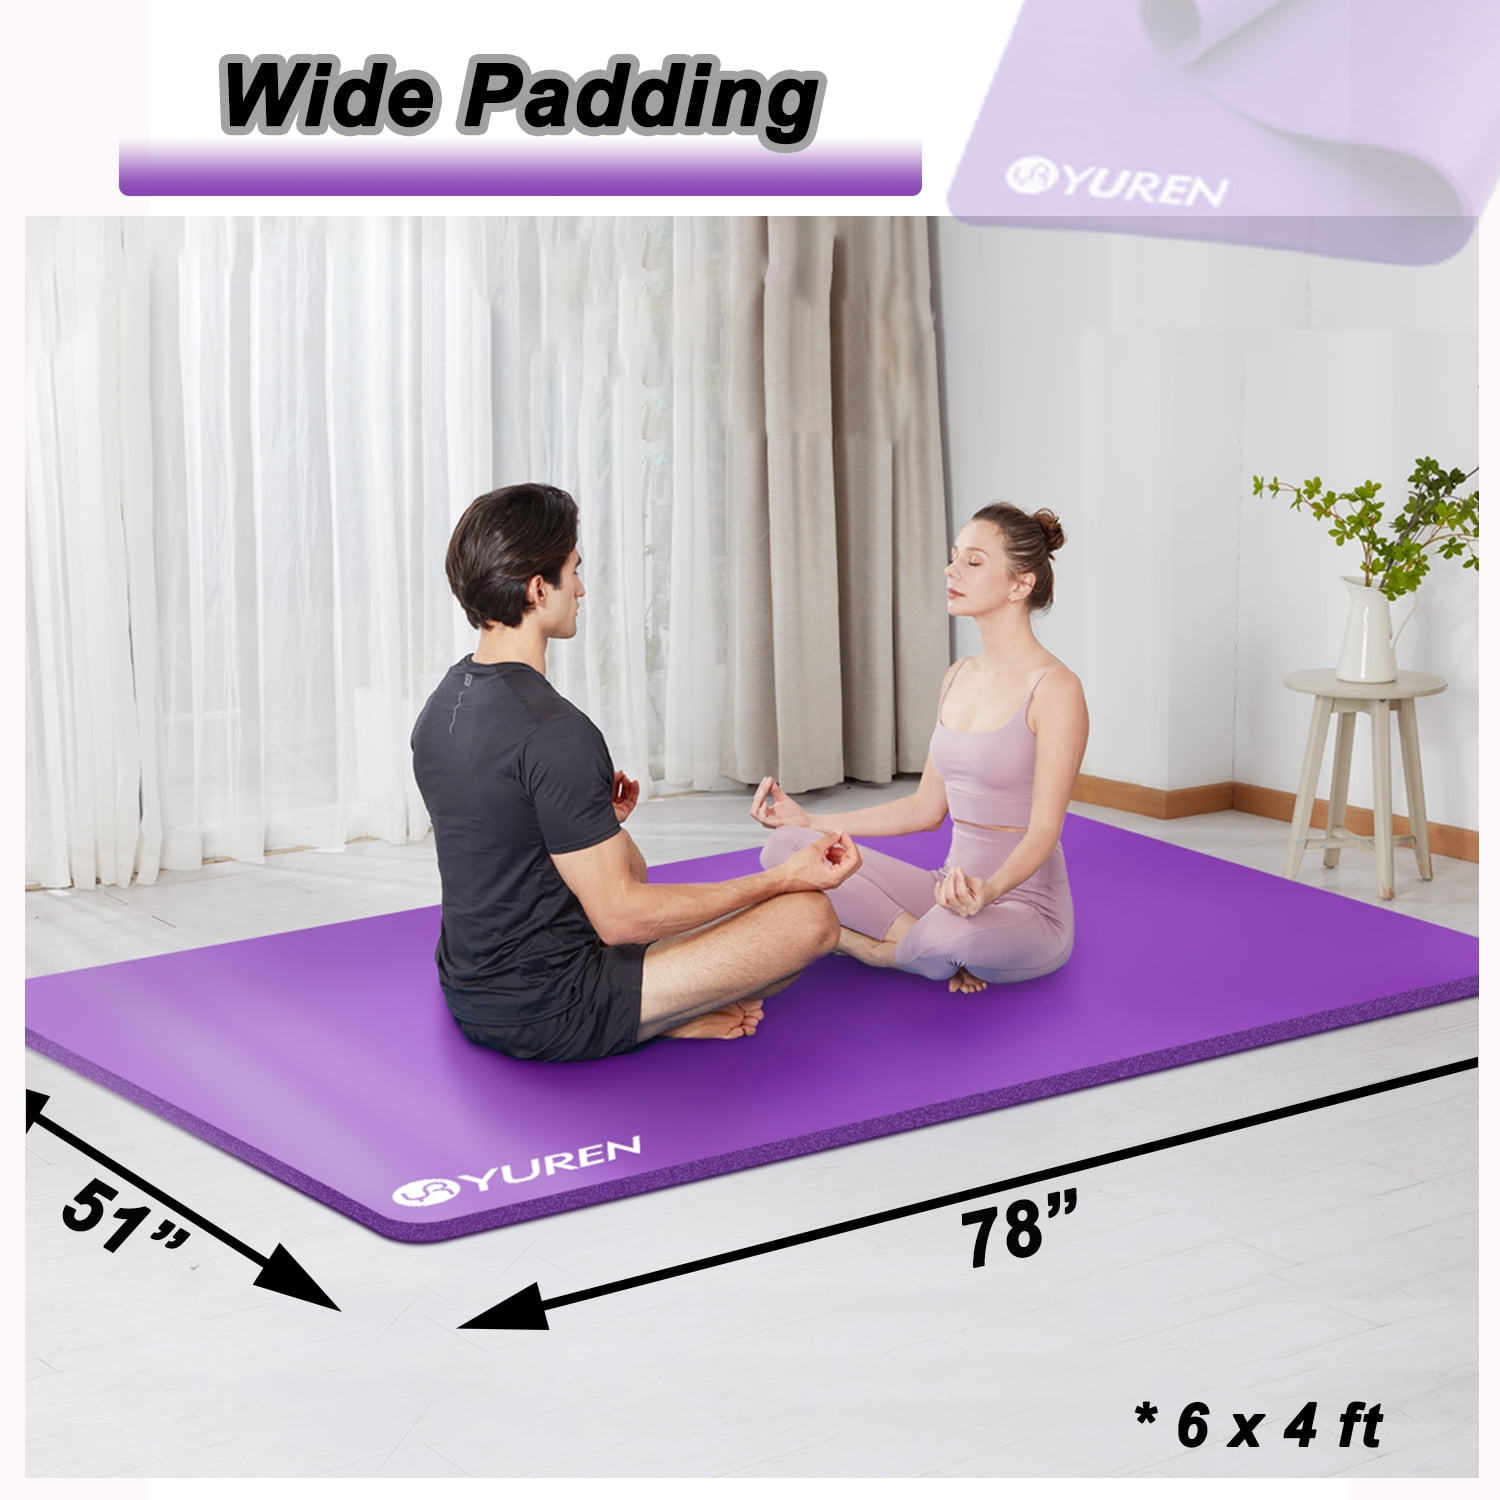 Extra Thick Yoga and Pilates Mat 0.5 inch Purple, 1 unit - City Market